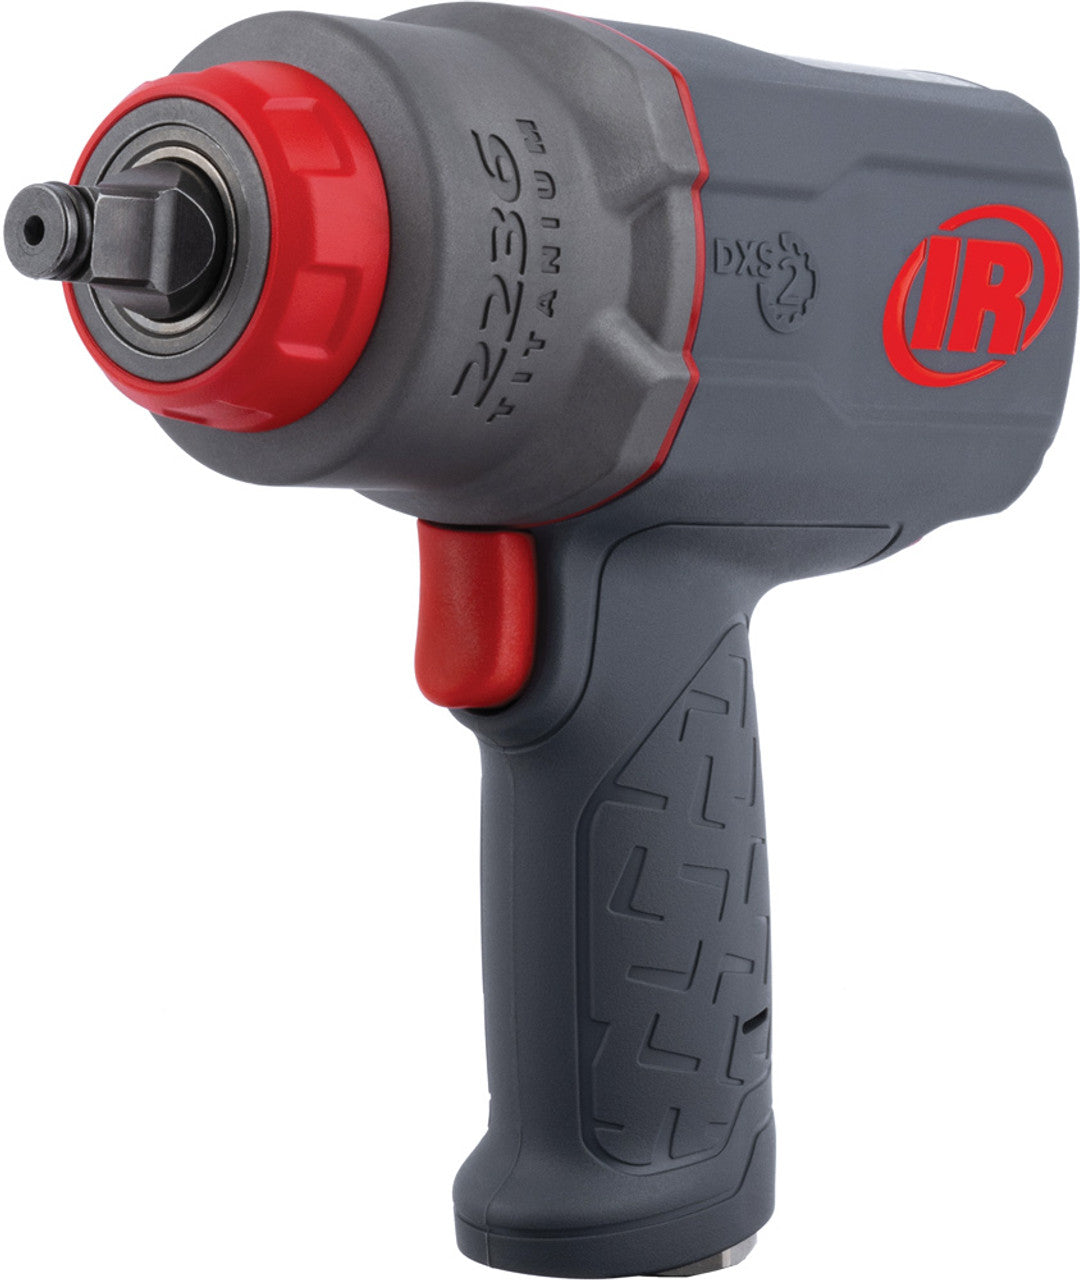 Ingersoll Rand 2236QTIMAX 1/2" Dr. Standard Anvil Quiet Impact Wrench with DXS Drive XChange System, 1500 Ft-Lb, 7500 RPM